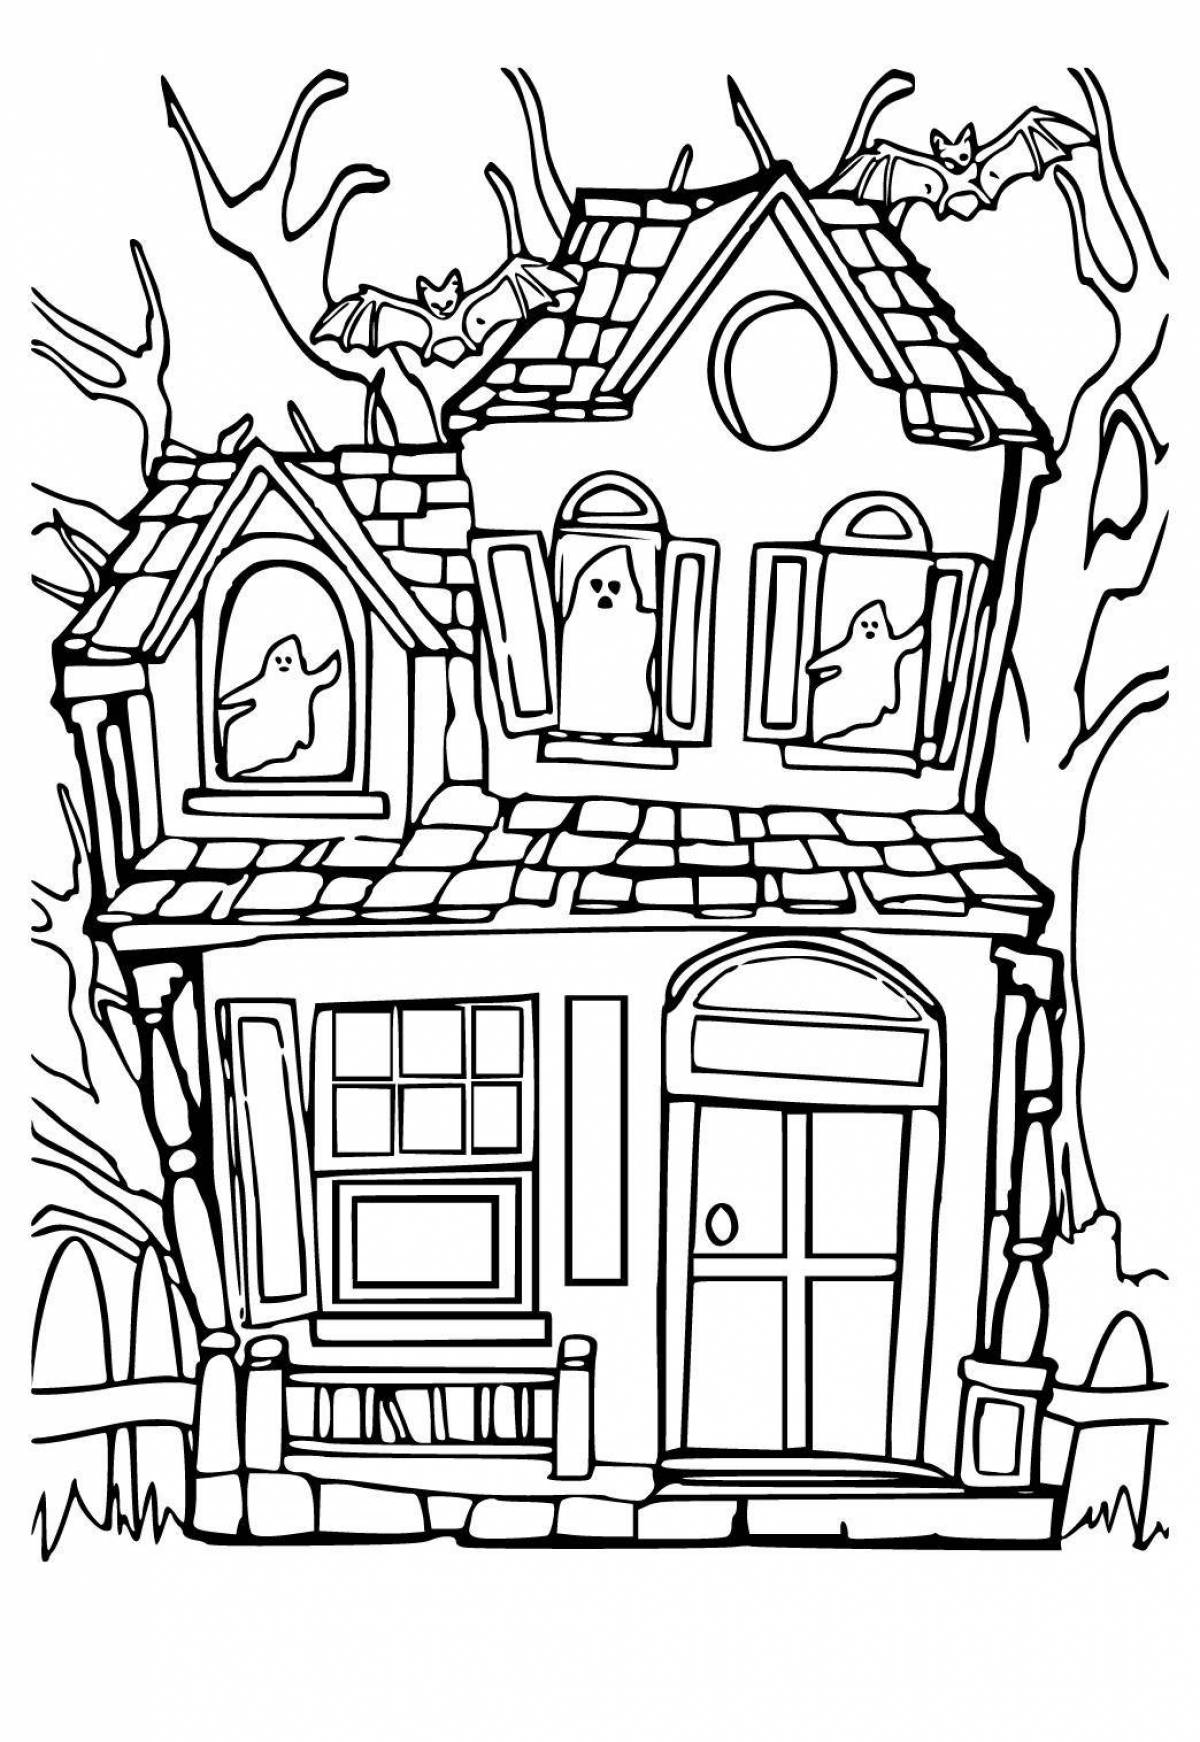 Coloring book exquisite homebody